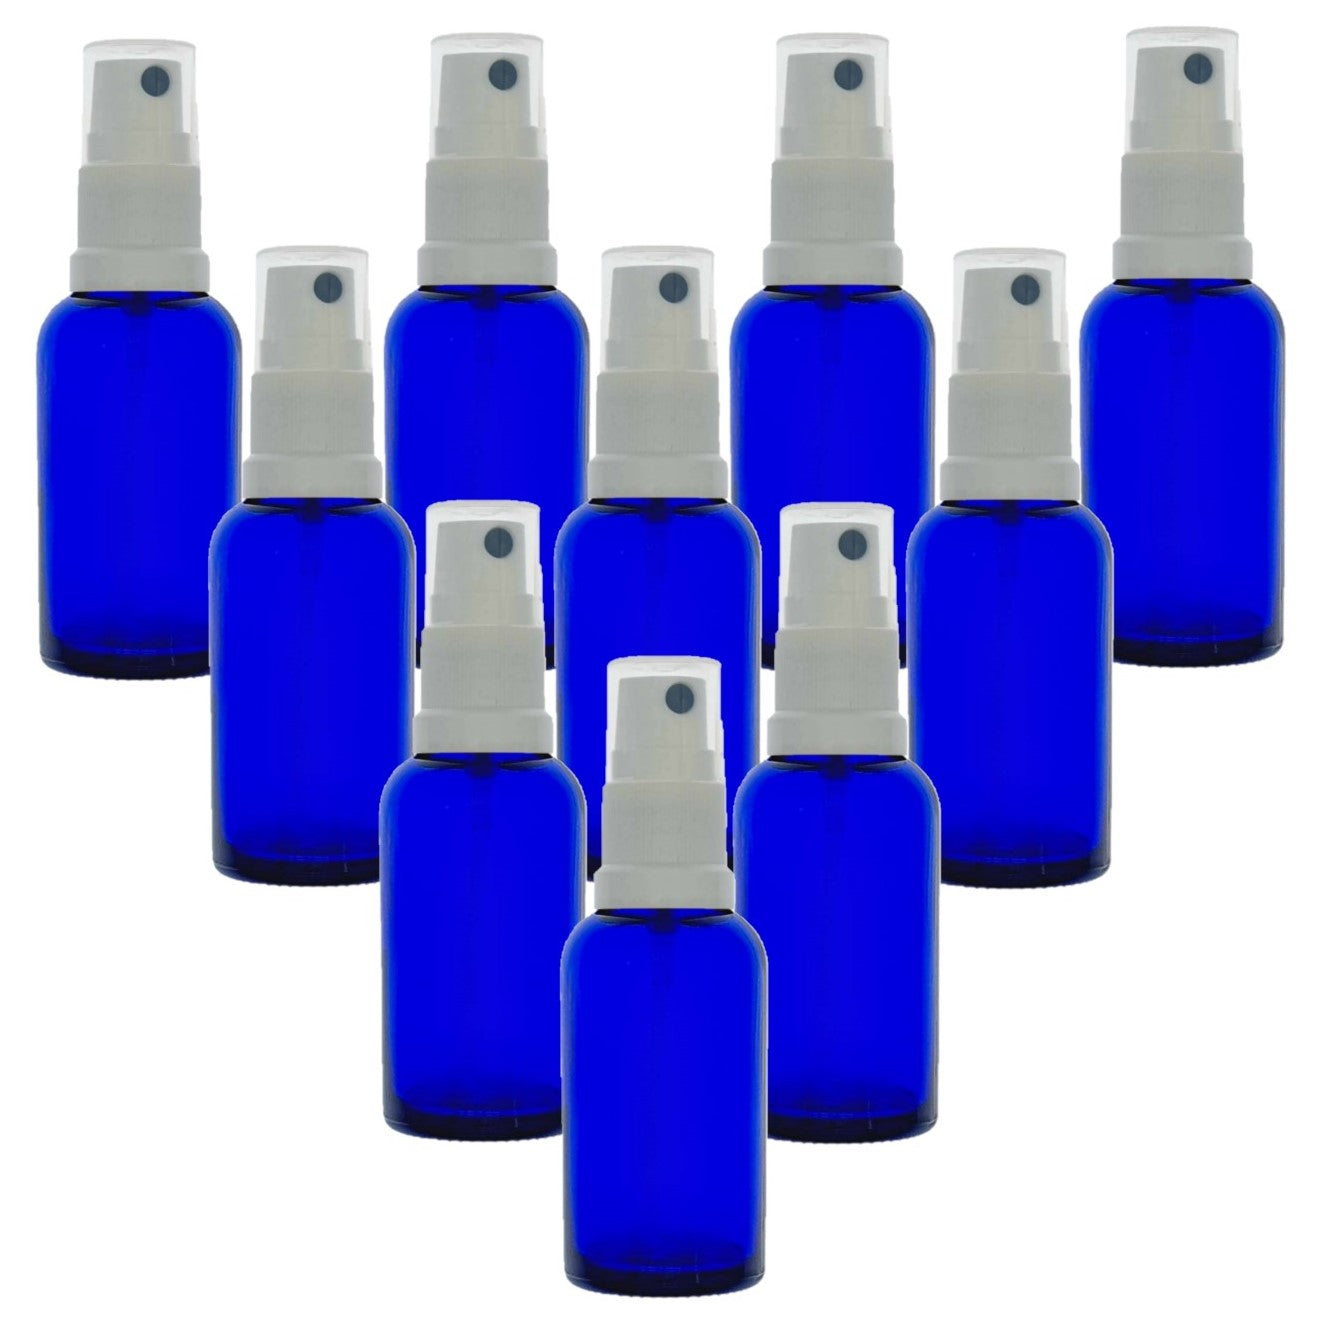 30ml Blue Glass Bottles with White Atomiser Spray and Clear Overcap